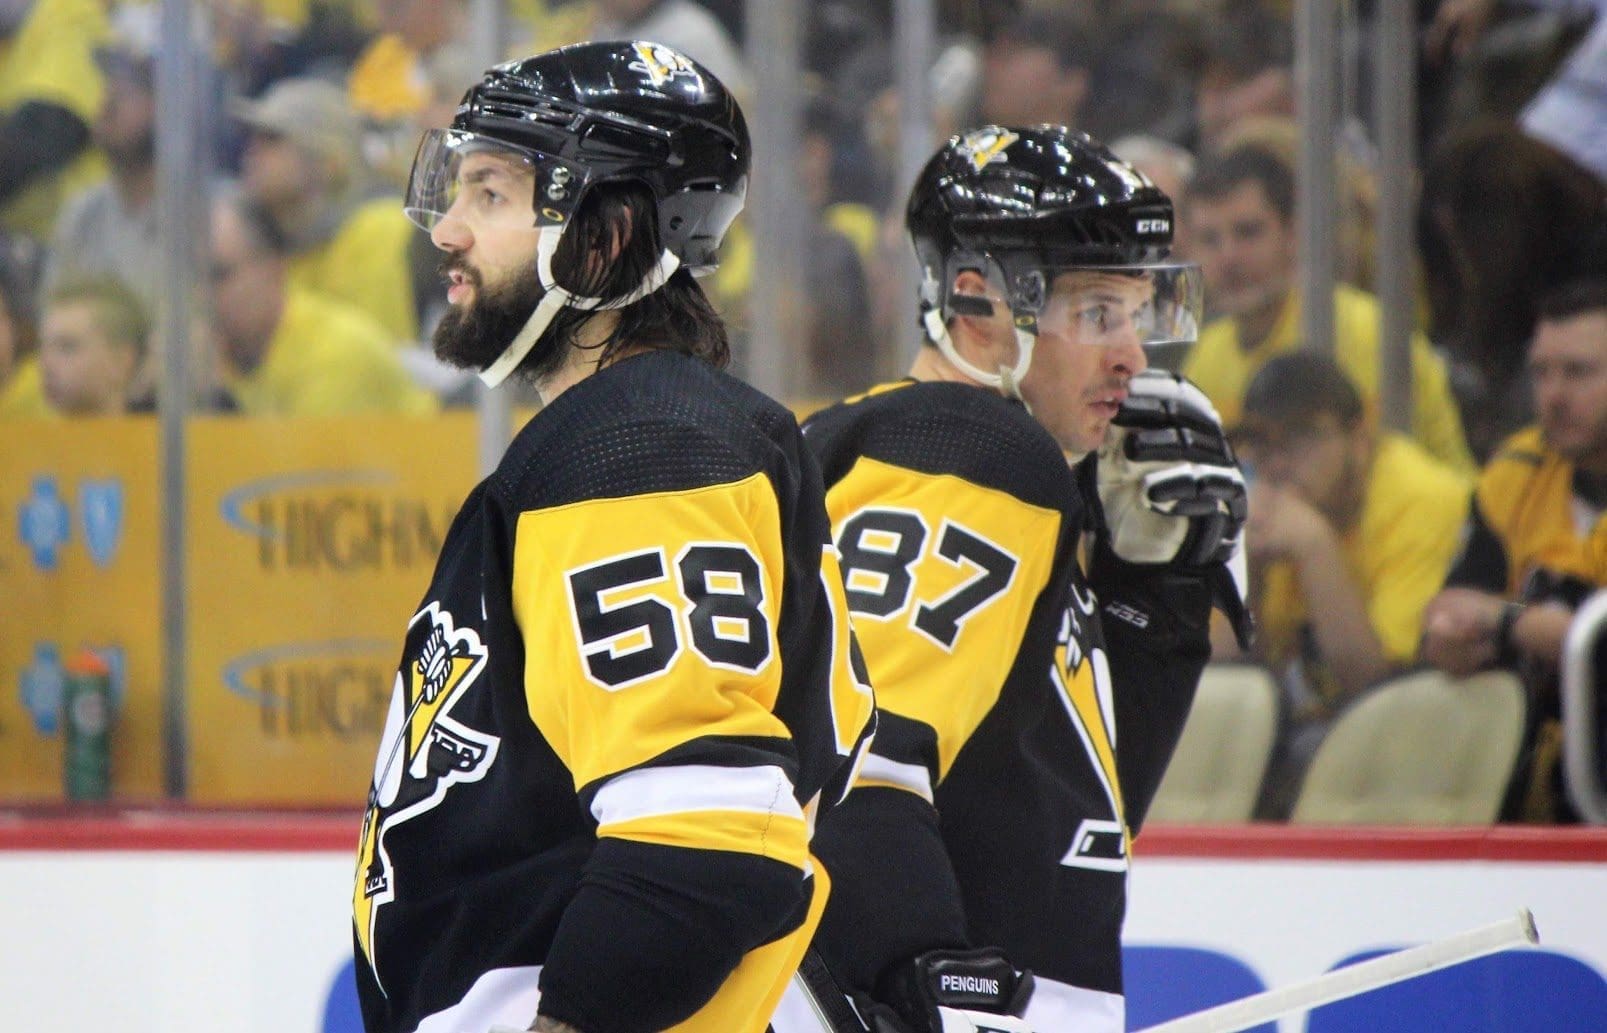 NHL trade, Kris Letang (left) and Sidney Crosby (right). Pittsburgh Penguins